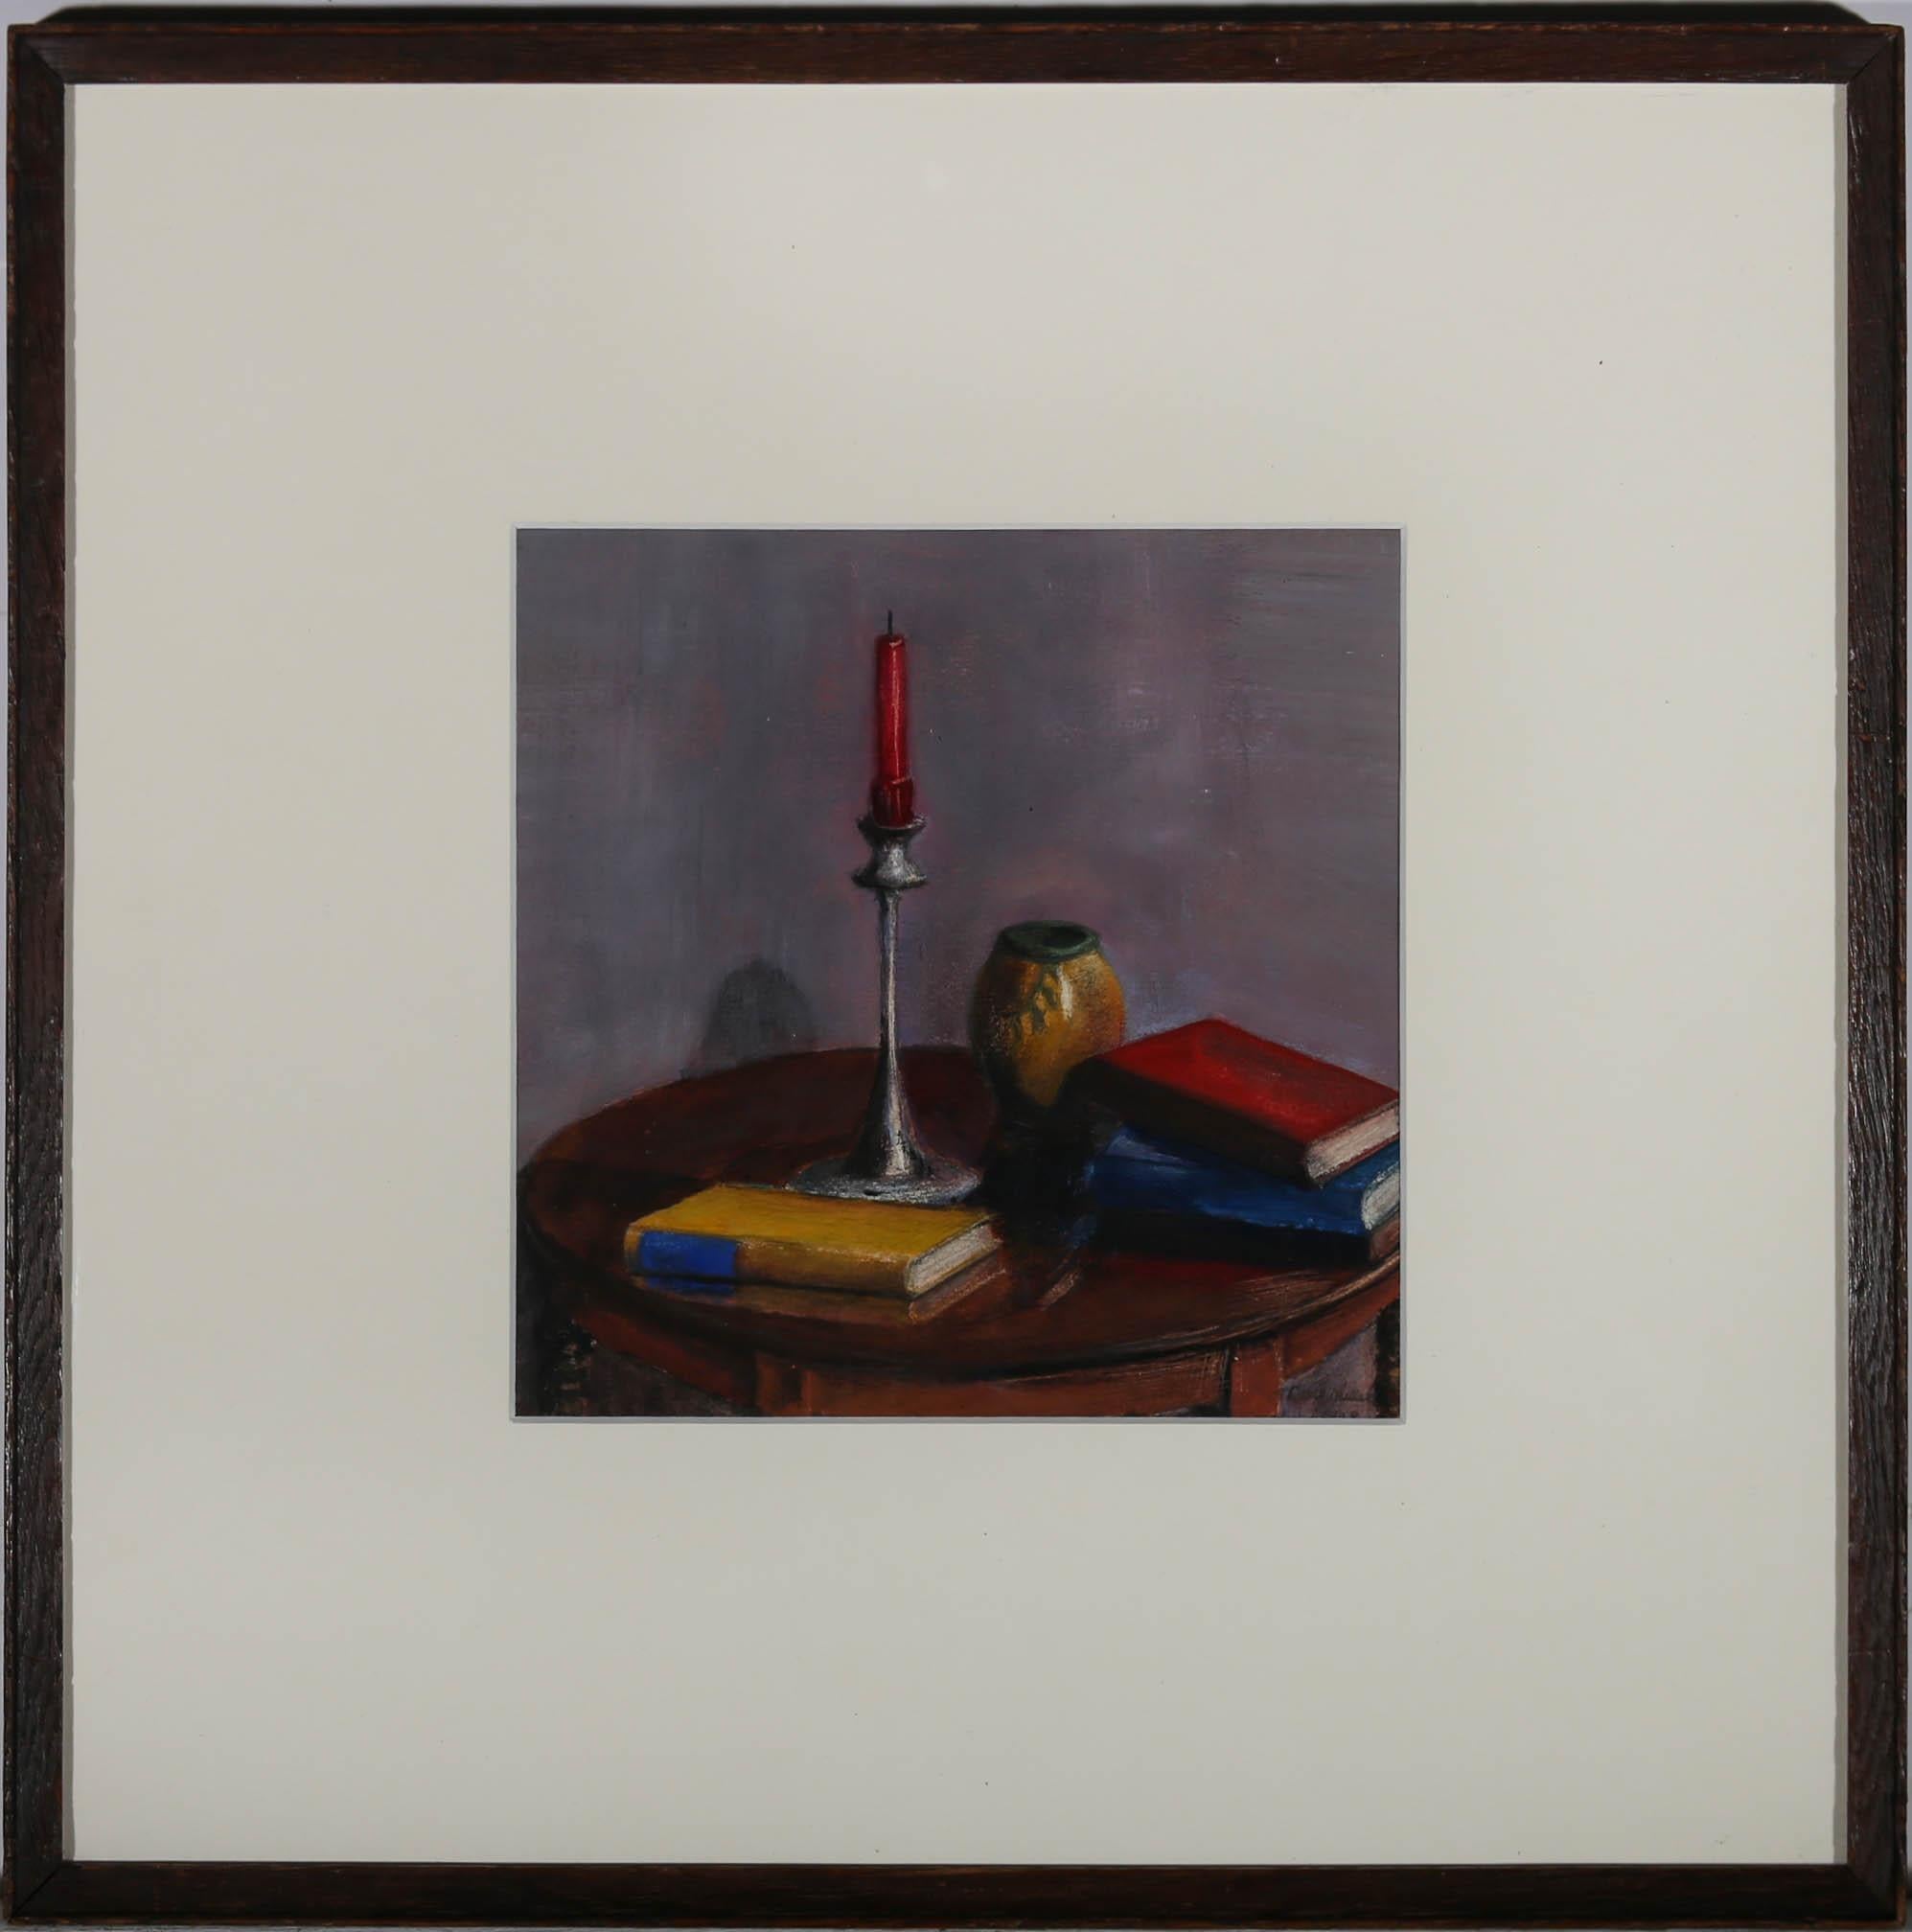 Colourful books, a candlestick and vase have been collectively portrayed by artist Drew Miller, in this striking still life study. Signed and dated to the lower right. The elegant scene has been beautifully presented in a complimenting white mount